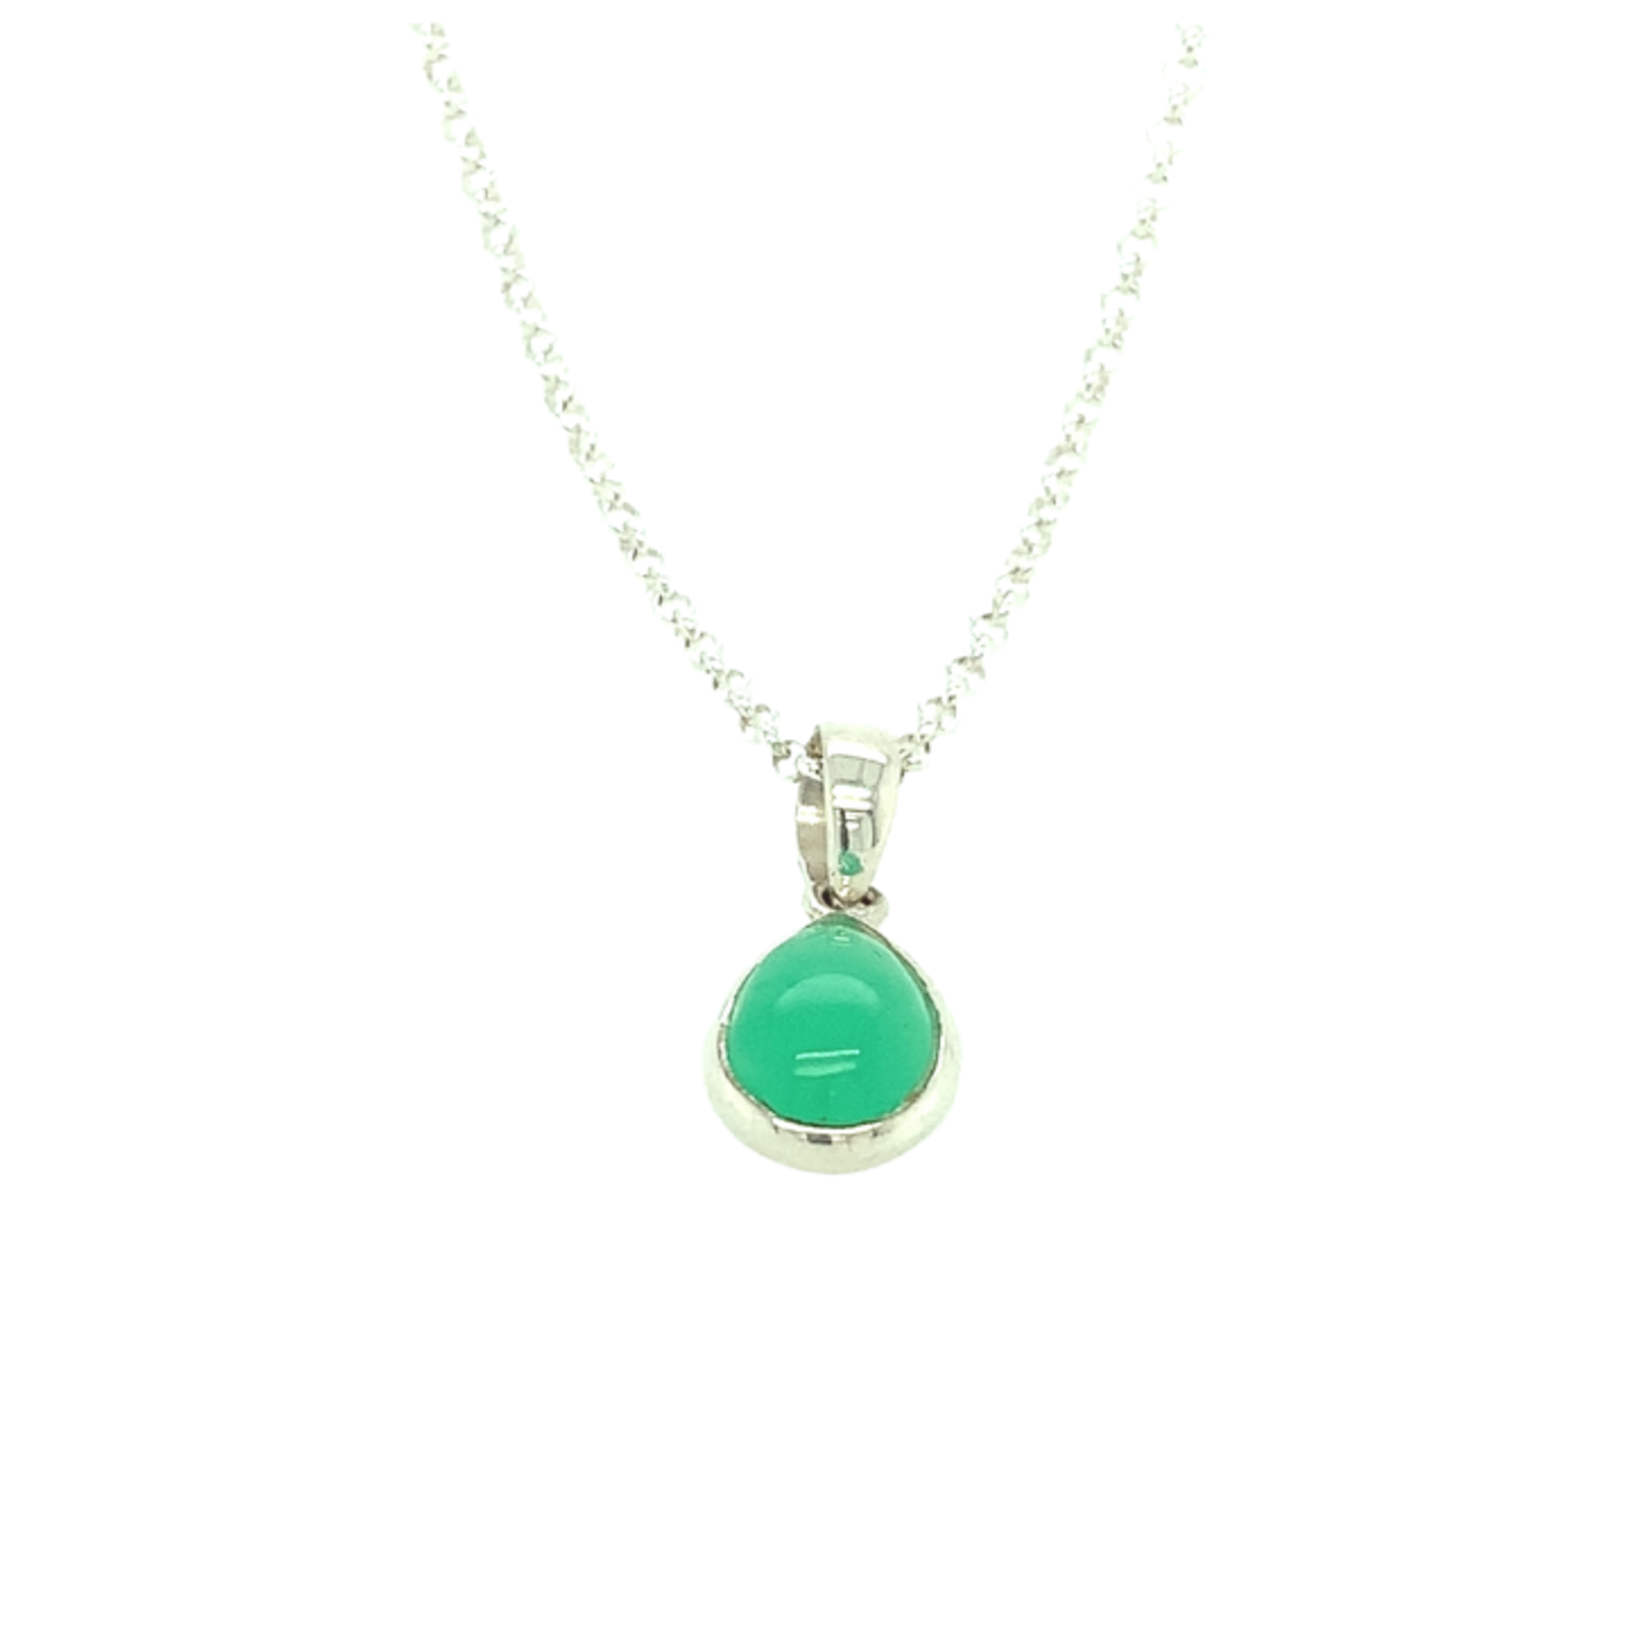 Chrysoprase pendant with necklace